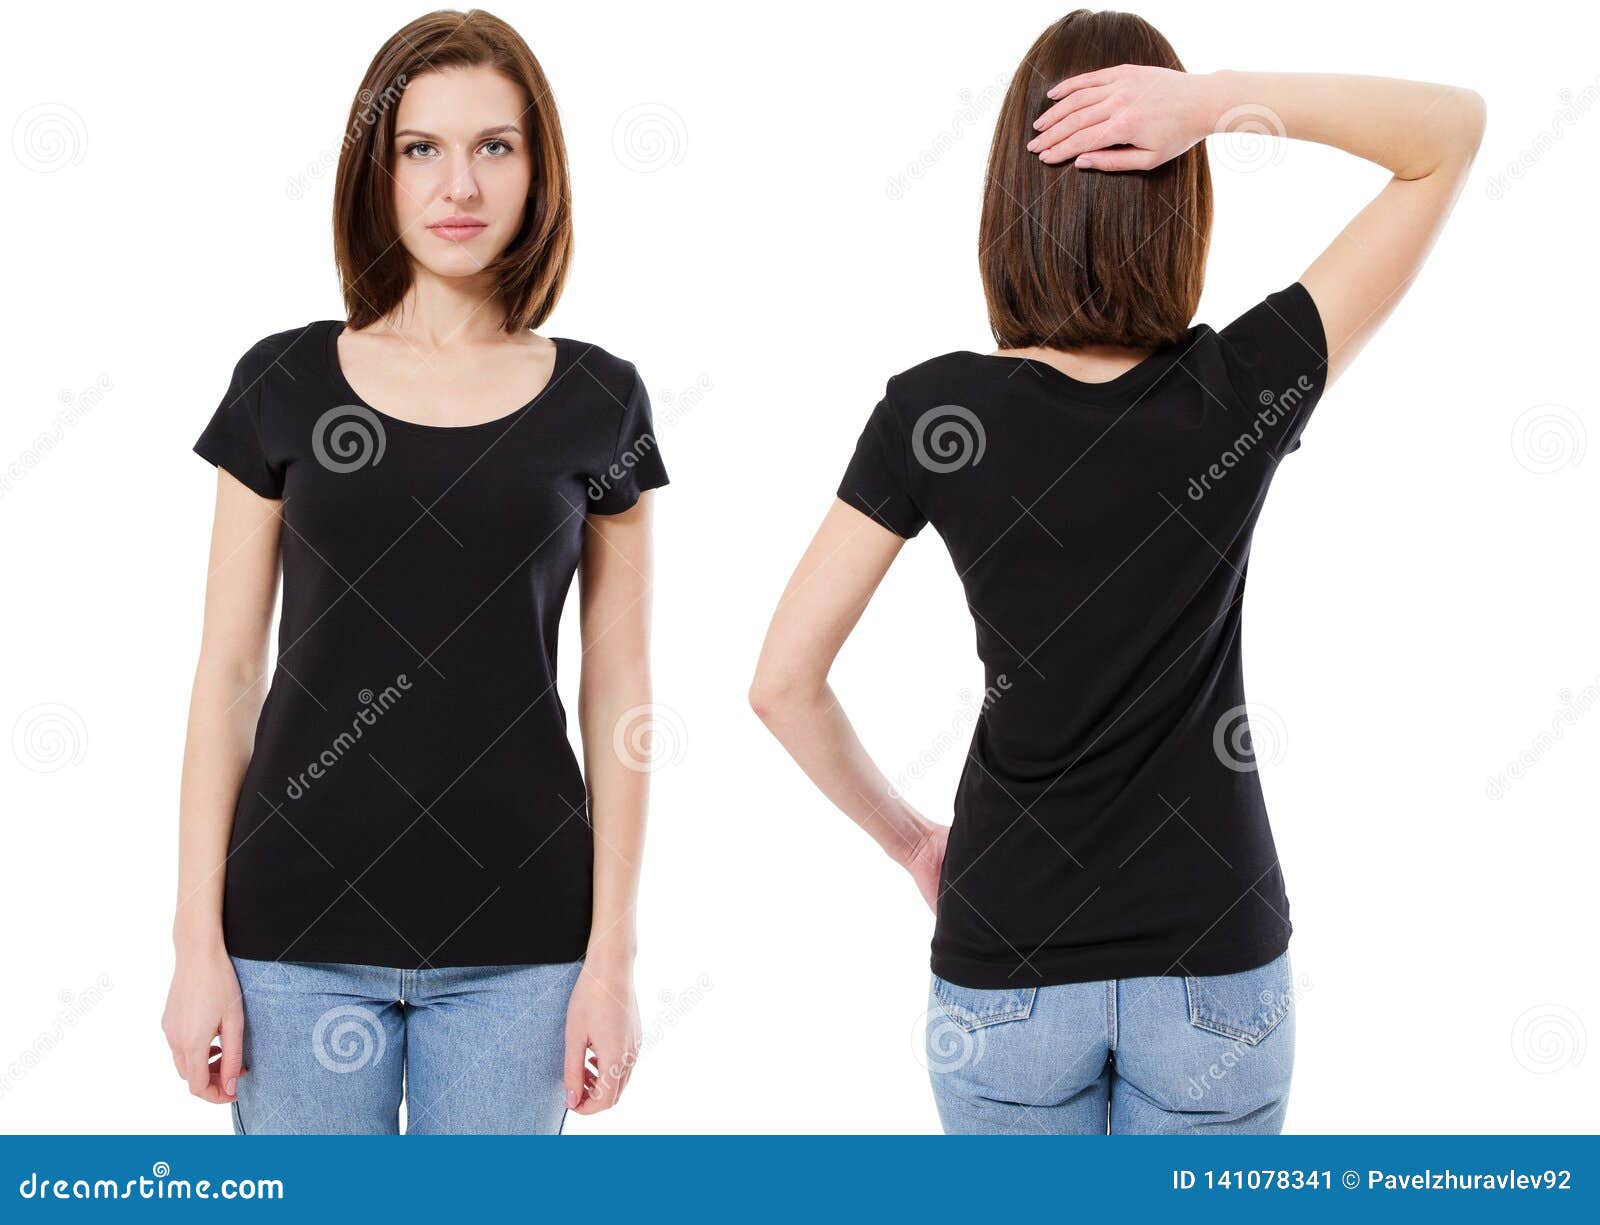 Download Mockup Of A Template Of A Black Woman`s T Shirt On A White ...